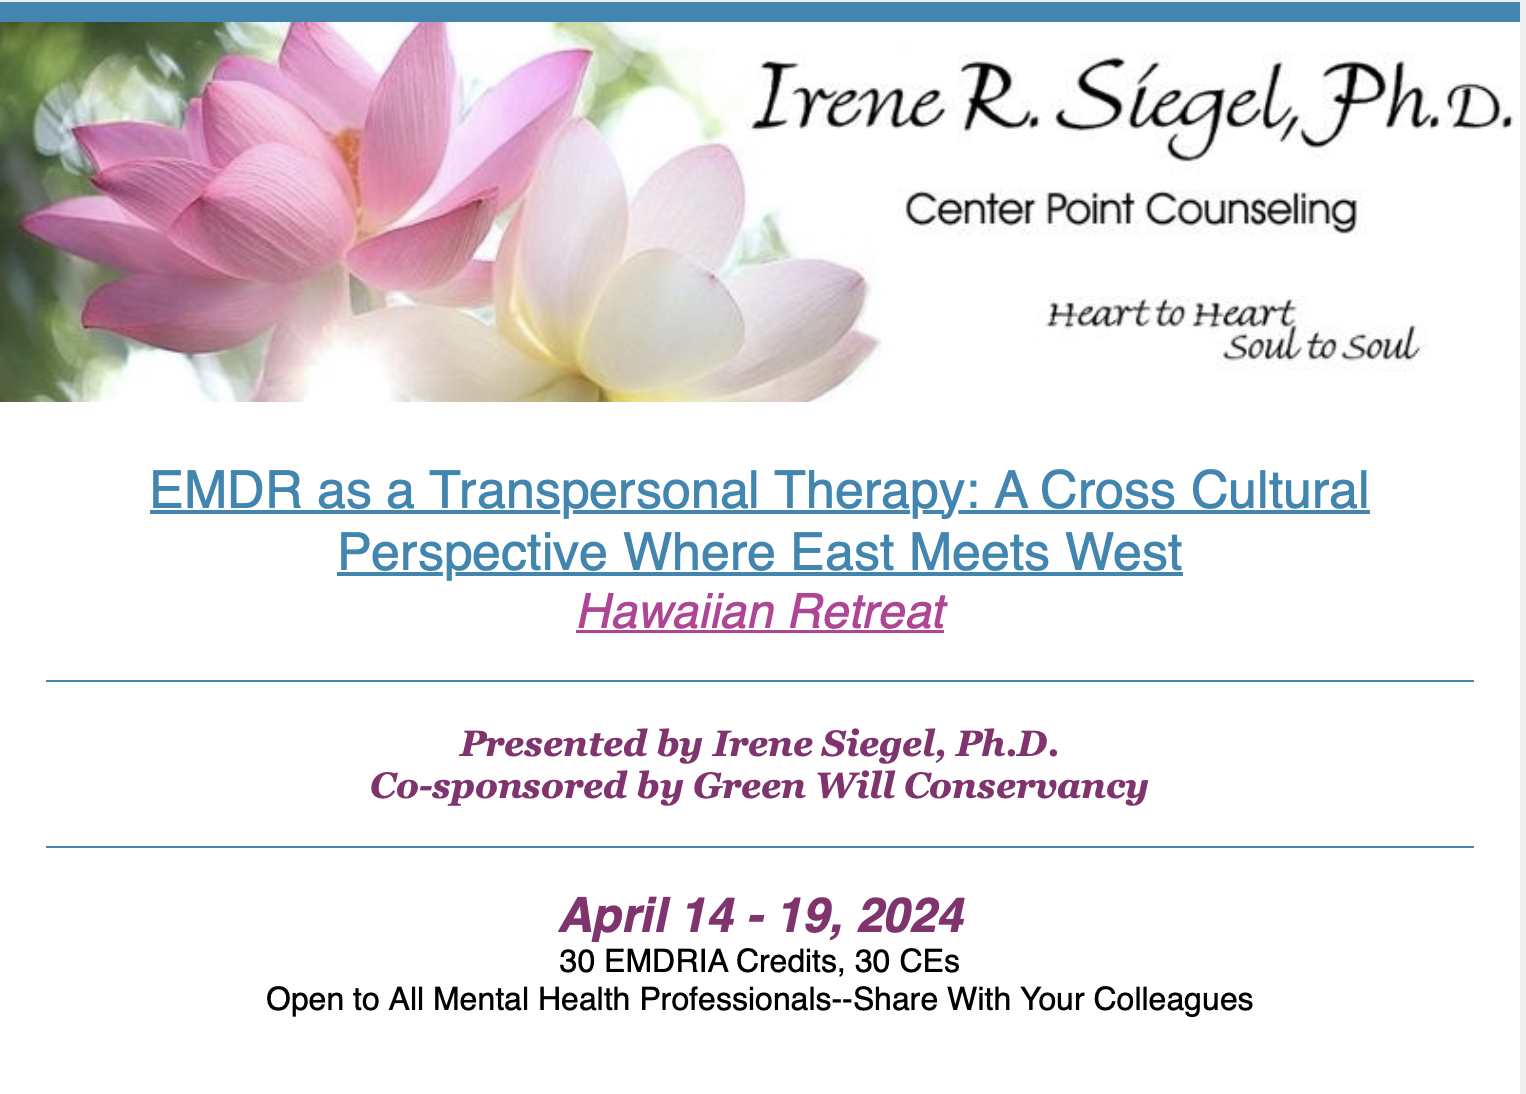 EMDR as a Transpersonal Therapy: A Cross Cultural Perspective Where East Meets West Hawaiian Retreat